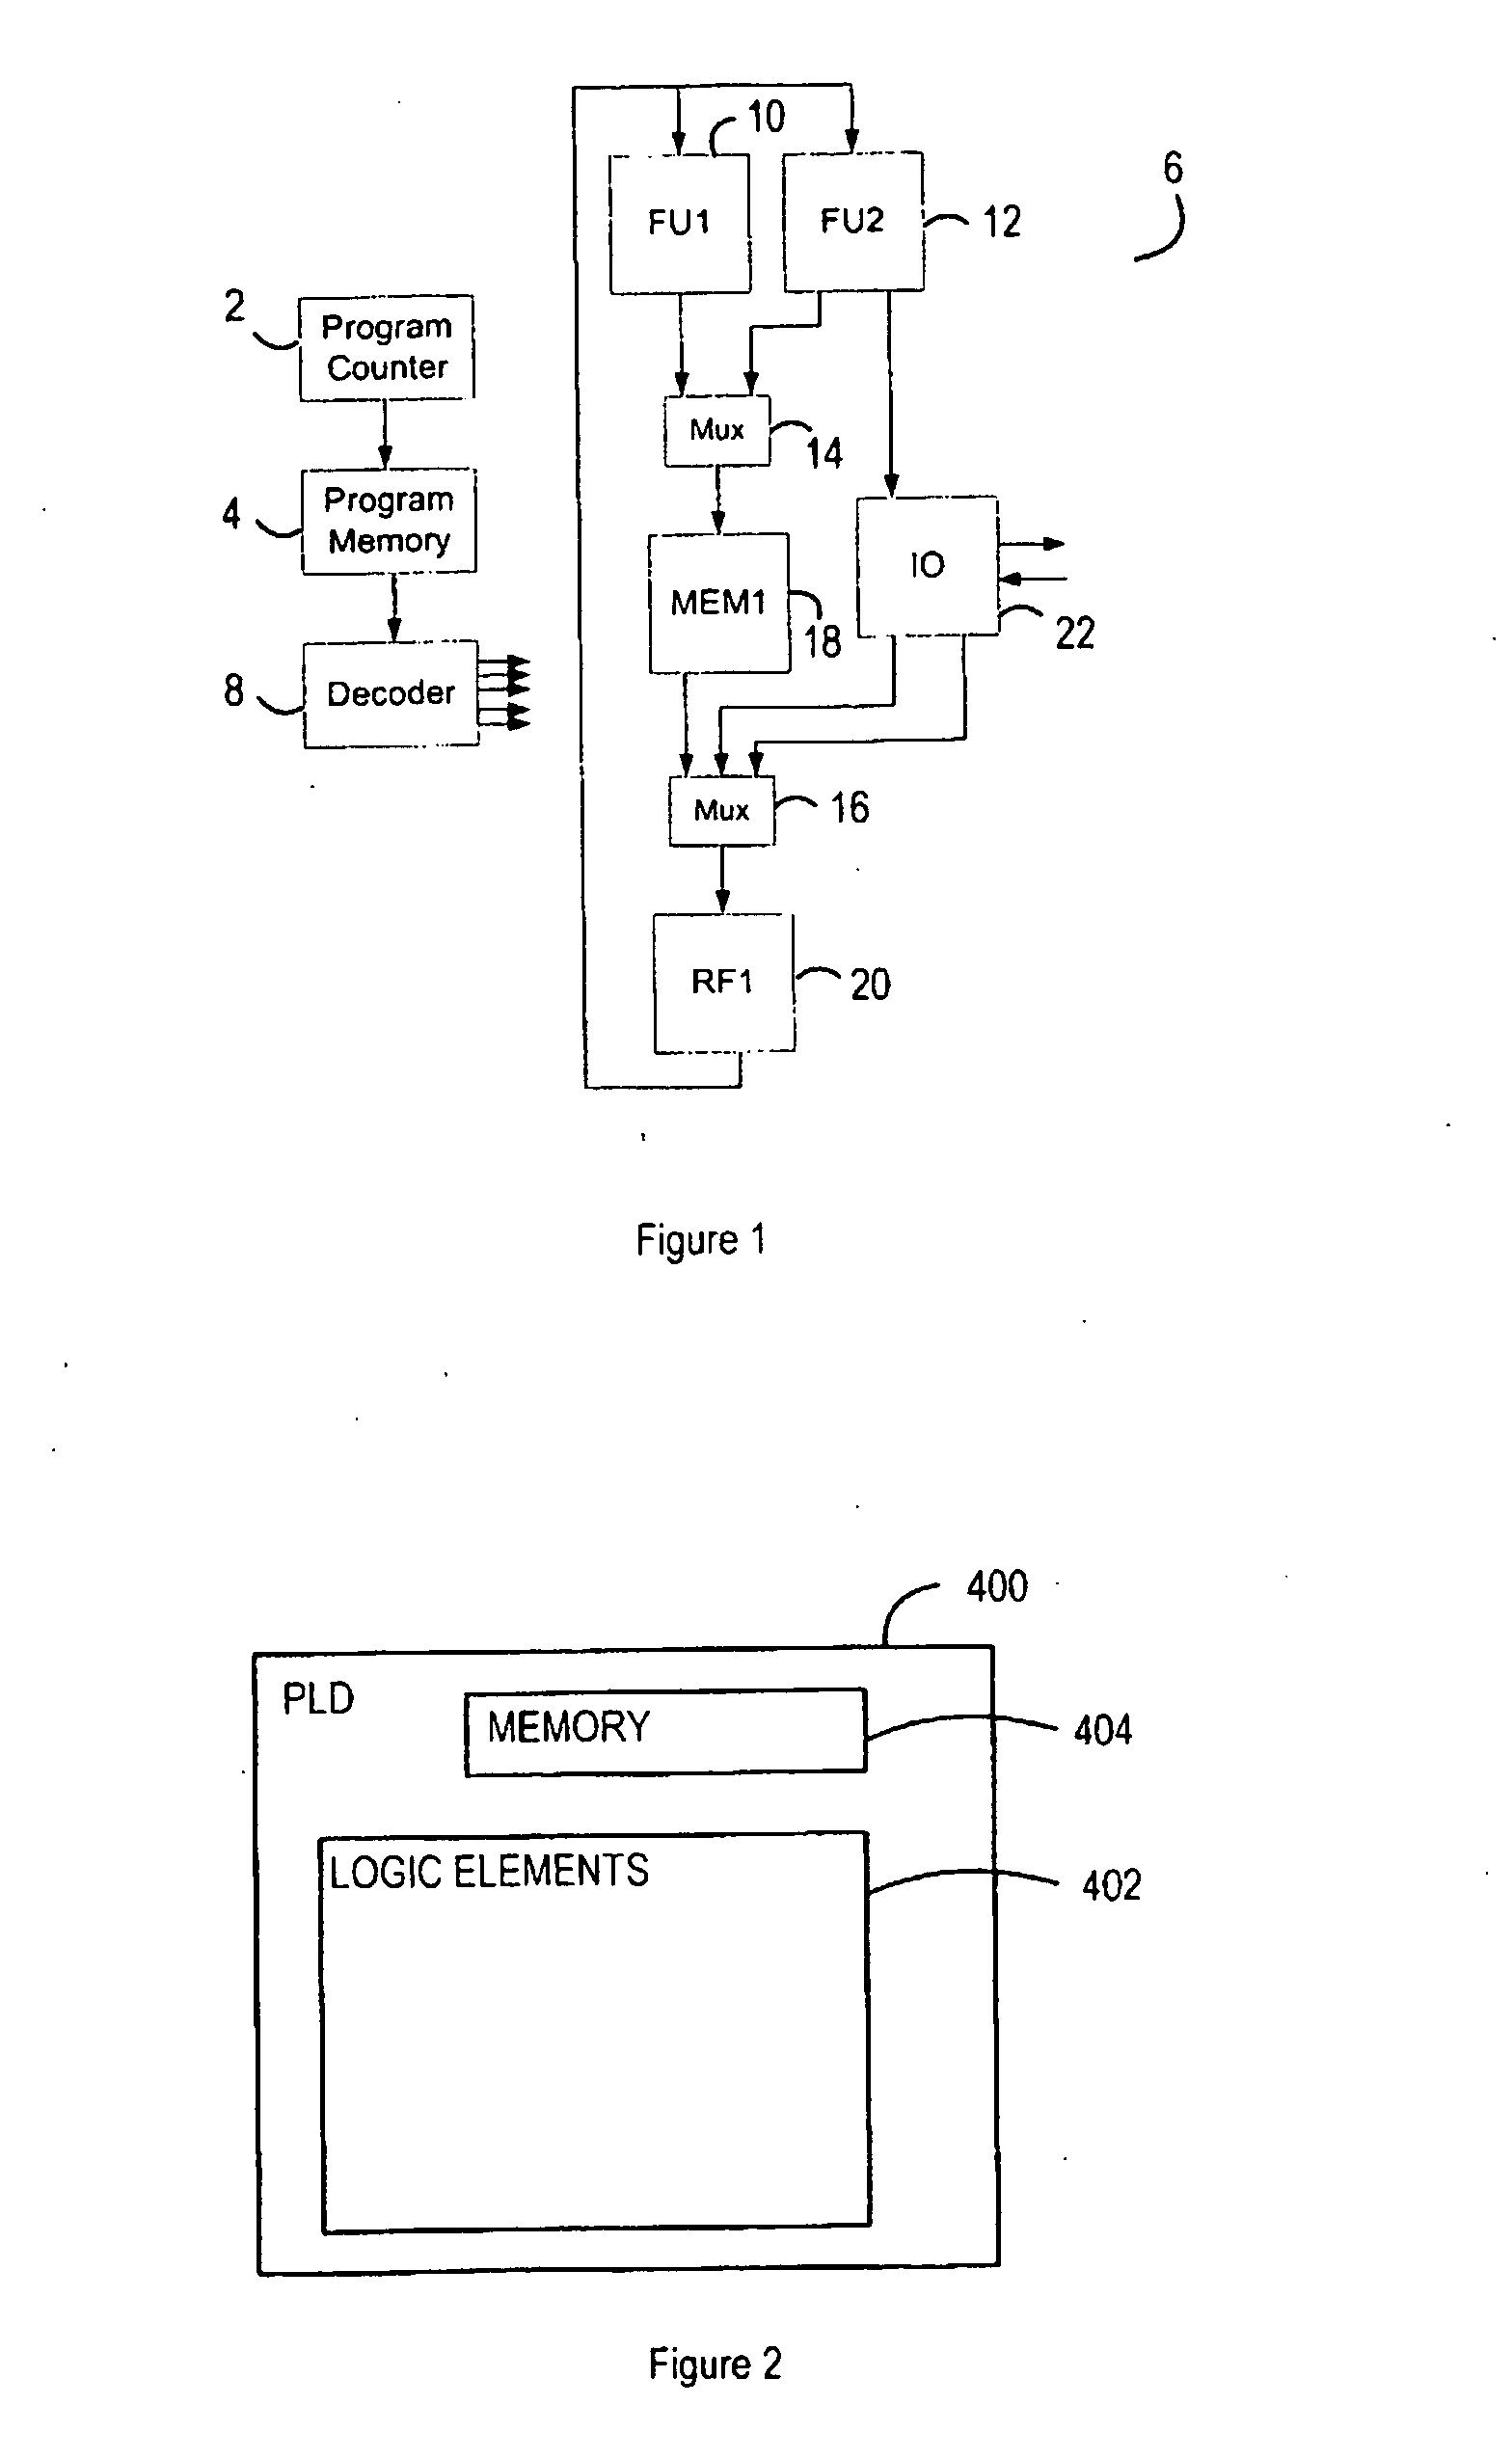 Method and apparatus for matrix decomposition in programmable logic devices